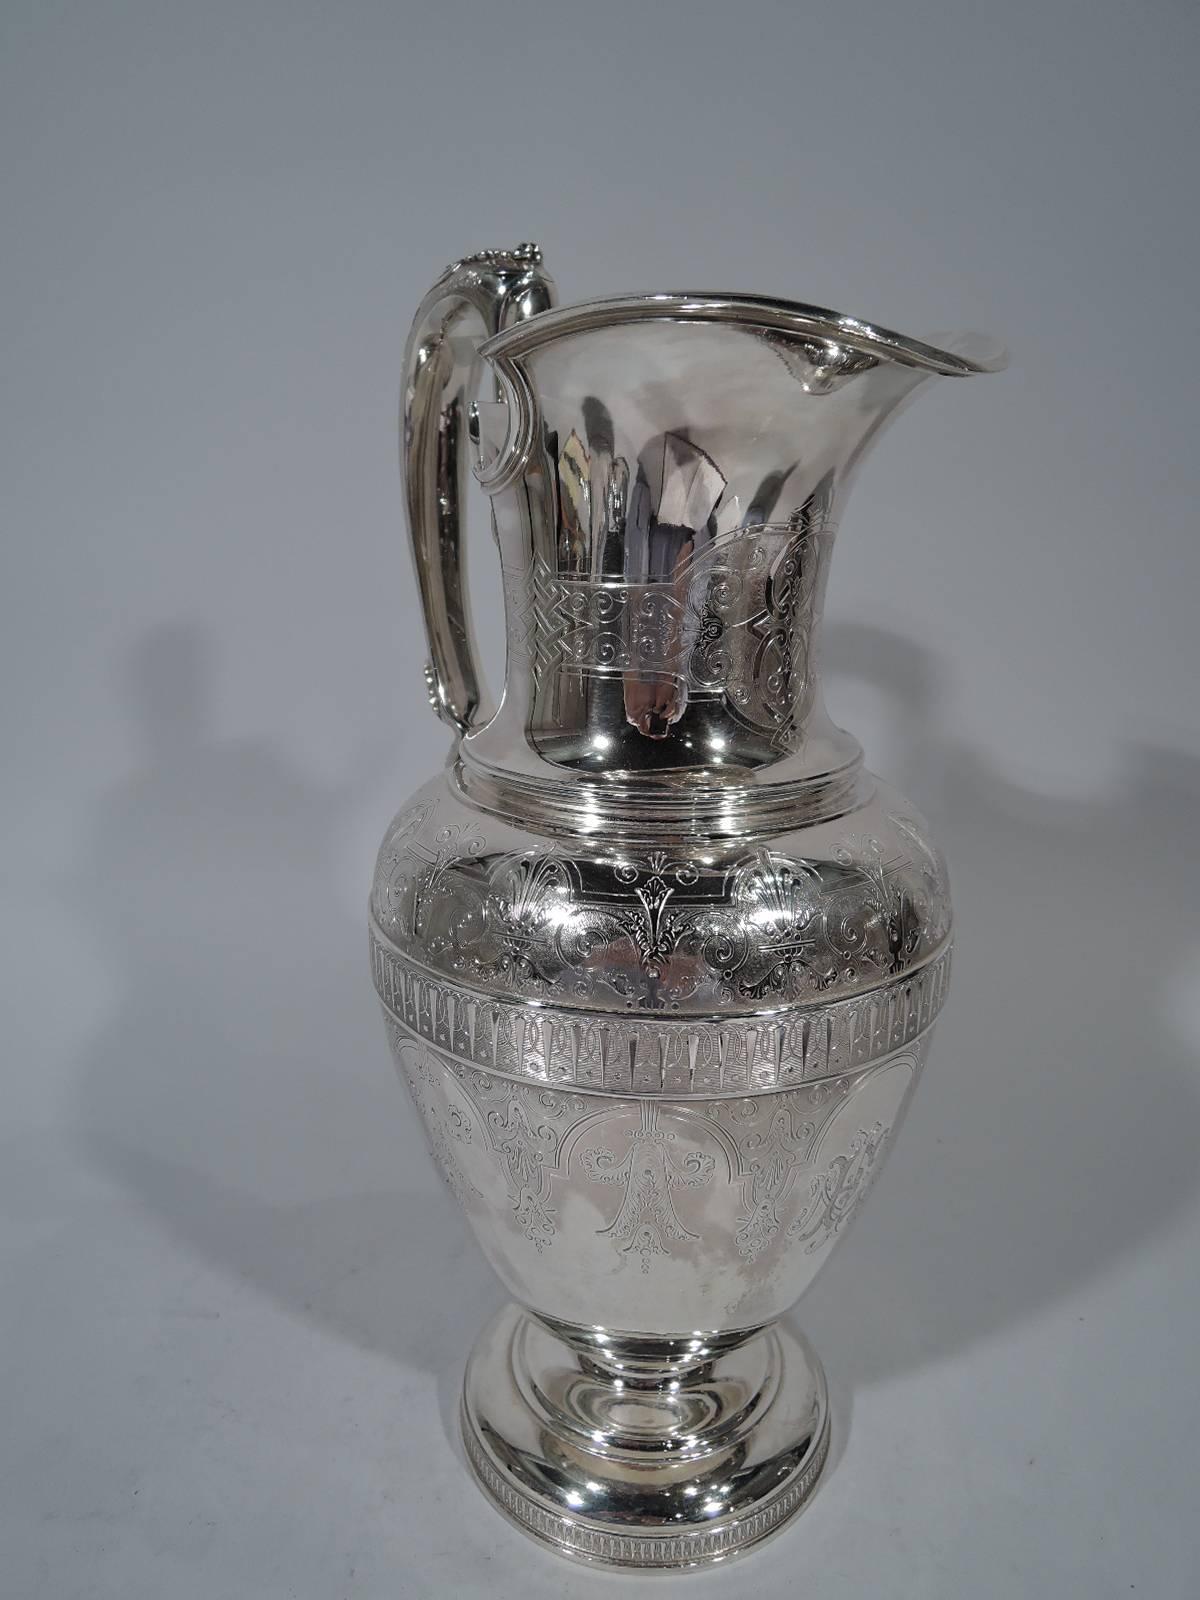 Early sterling silver ewer. Retailed by Tiffany & Co. in New York. Ovoid body with helmet mouth, high-looping handle, and stepped foot. Stylized ornament including volute scrolls, leaves, and leaf-and-dart. Handle has same ornament applied to ribbed